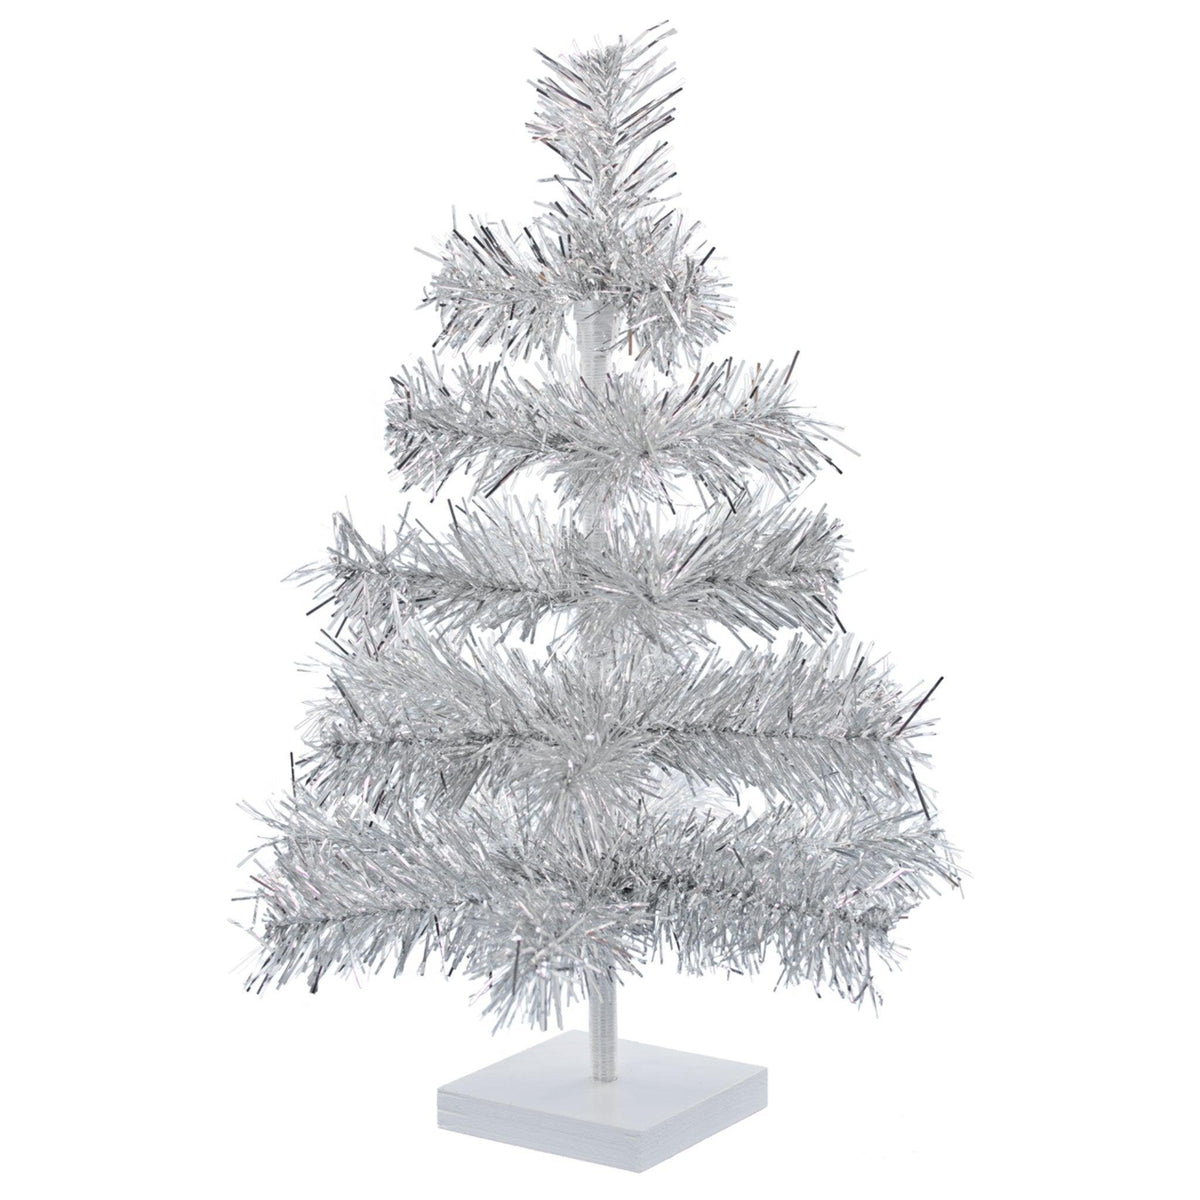 Lee Display's Original Silver Tinsel Christmas Trees!    Decorate for the holidays w/ a retro-style Silver Christmas Tree.  Incorporate a little silver into your holiday decorations this year.    4 Sizes to Choose:  18in - 48in Heights Available.  18in Trees are perfect table-top display heights and 48in Trees make beautiful centerpieces.